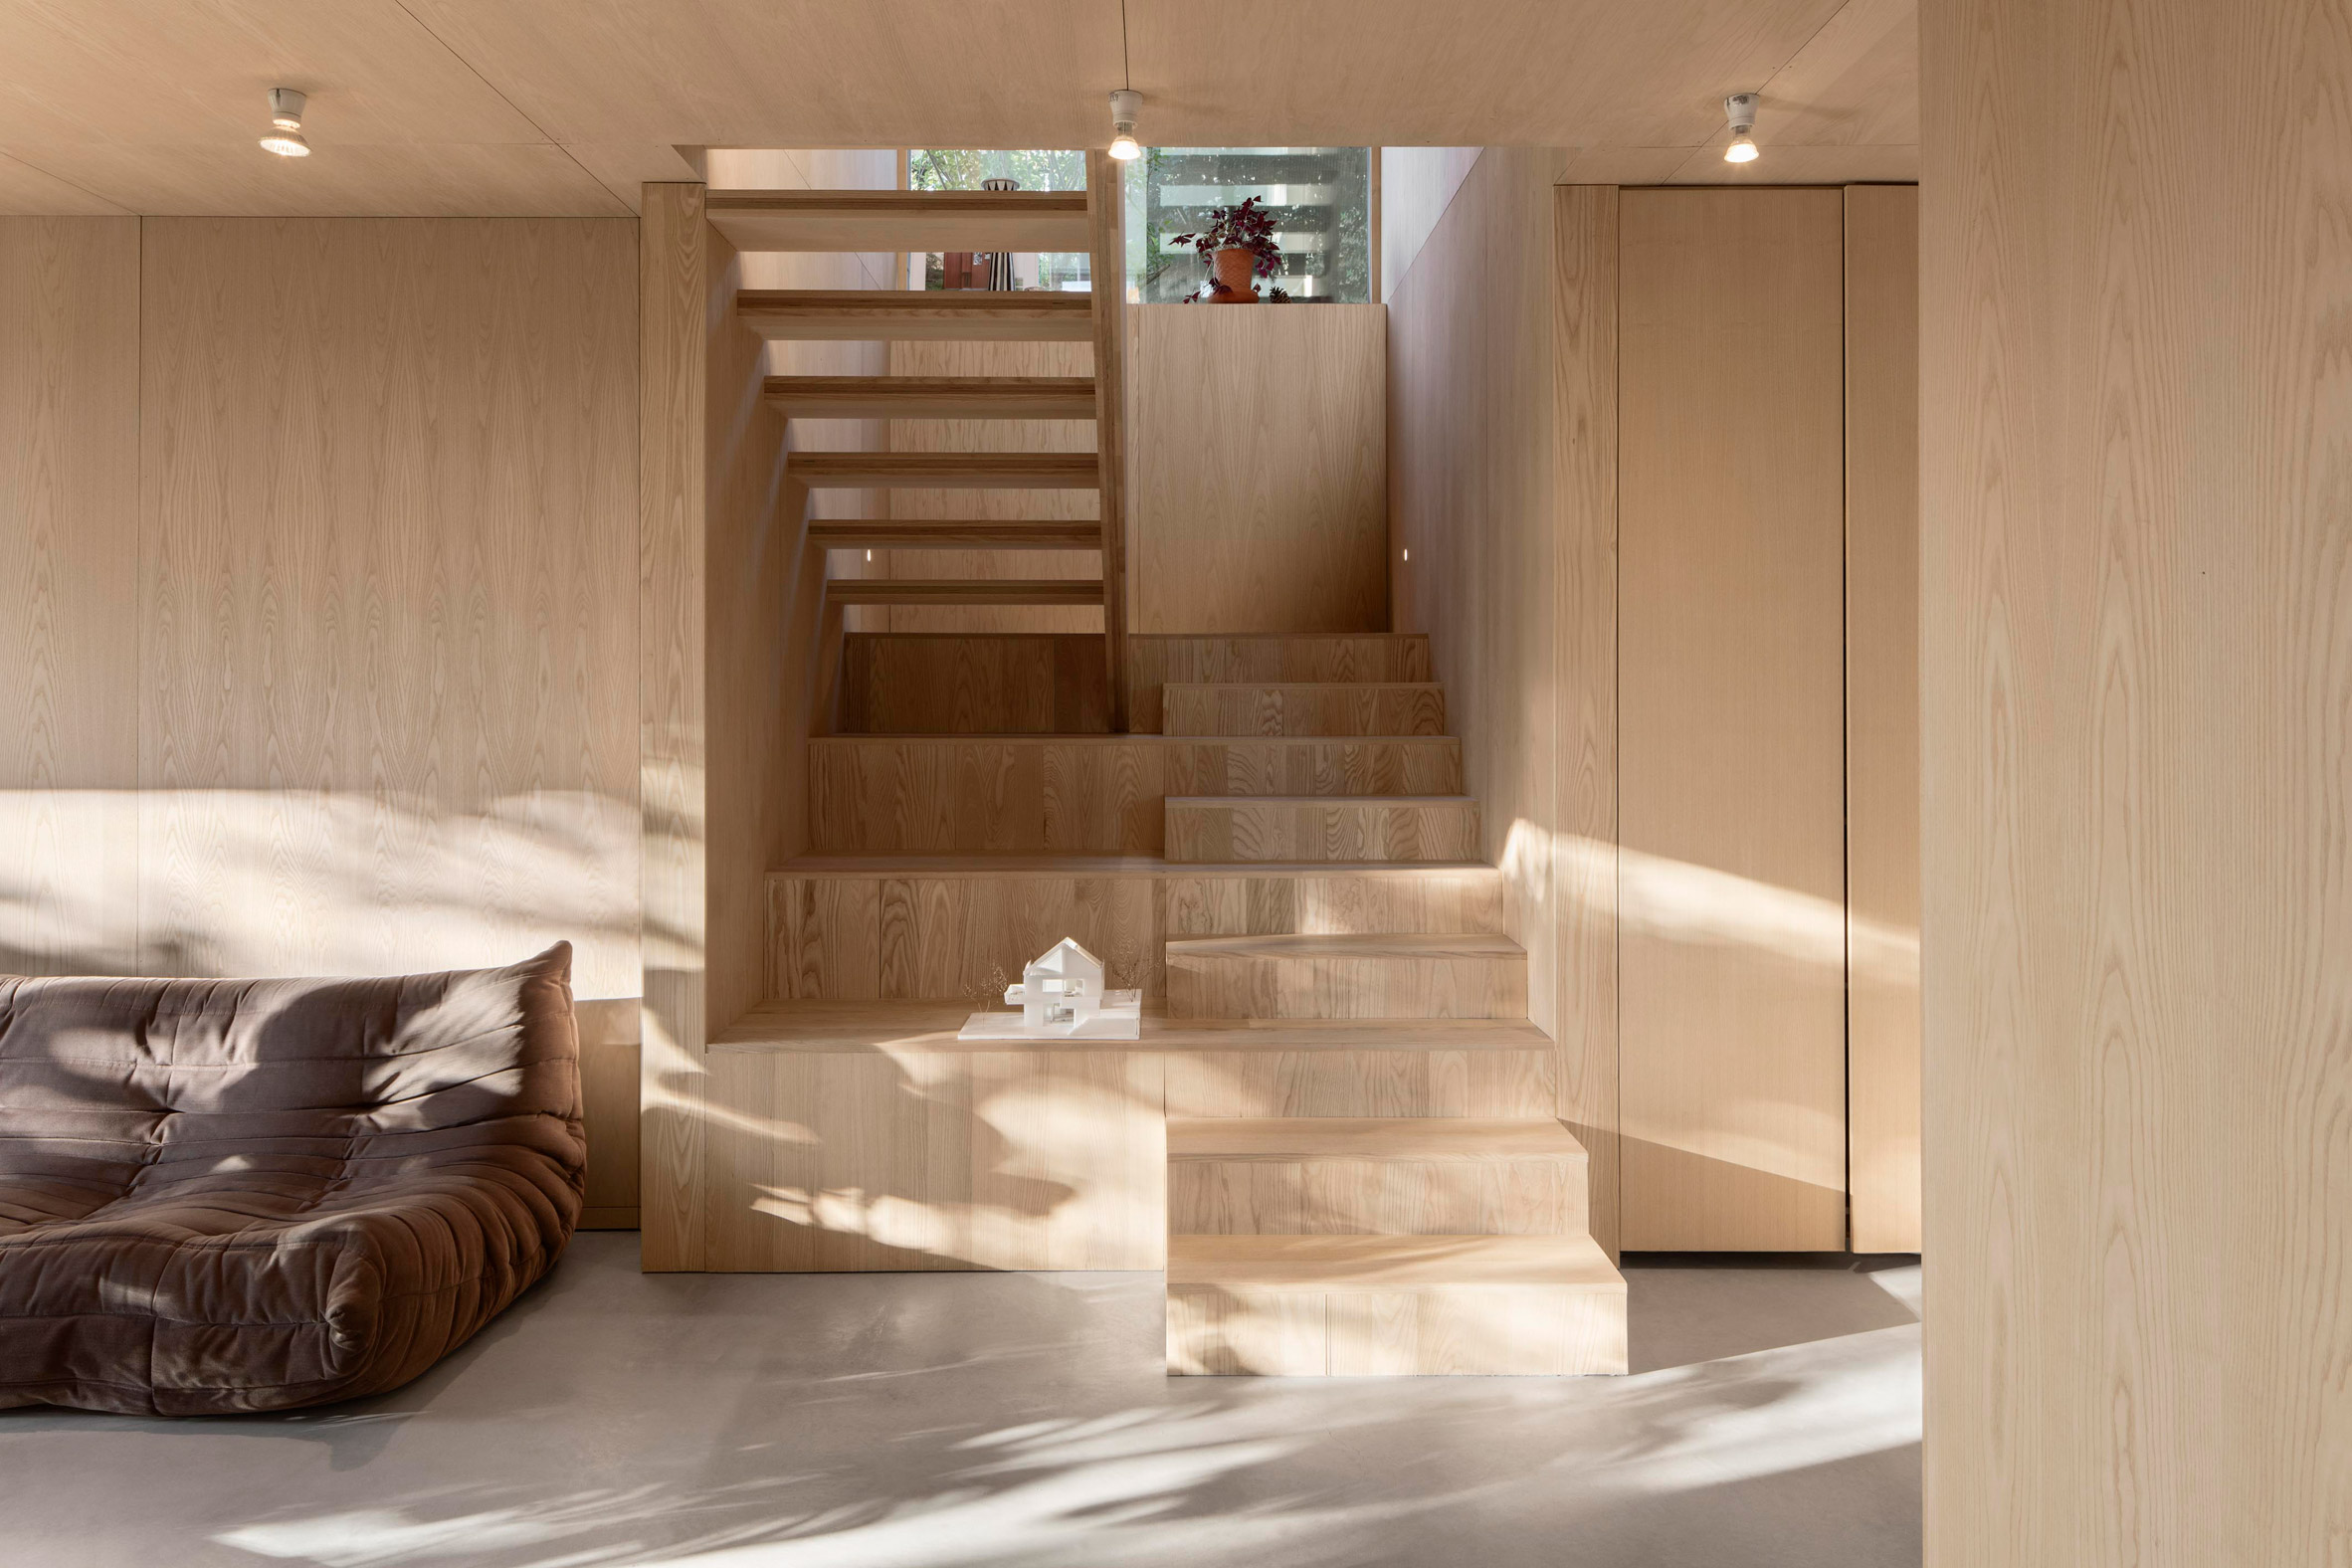 Ground floor staircase Villa Timmerman by Andreas Lyckefors and Josefine Wikholm